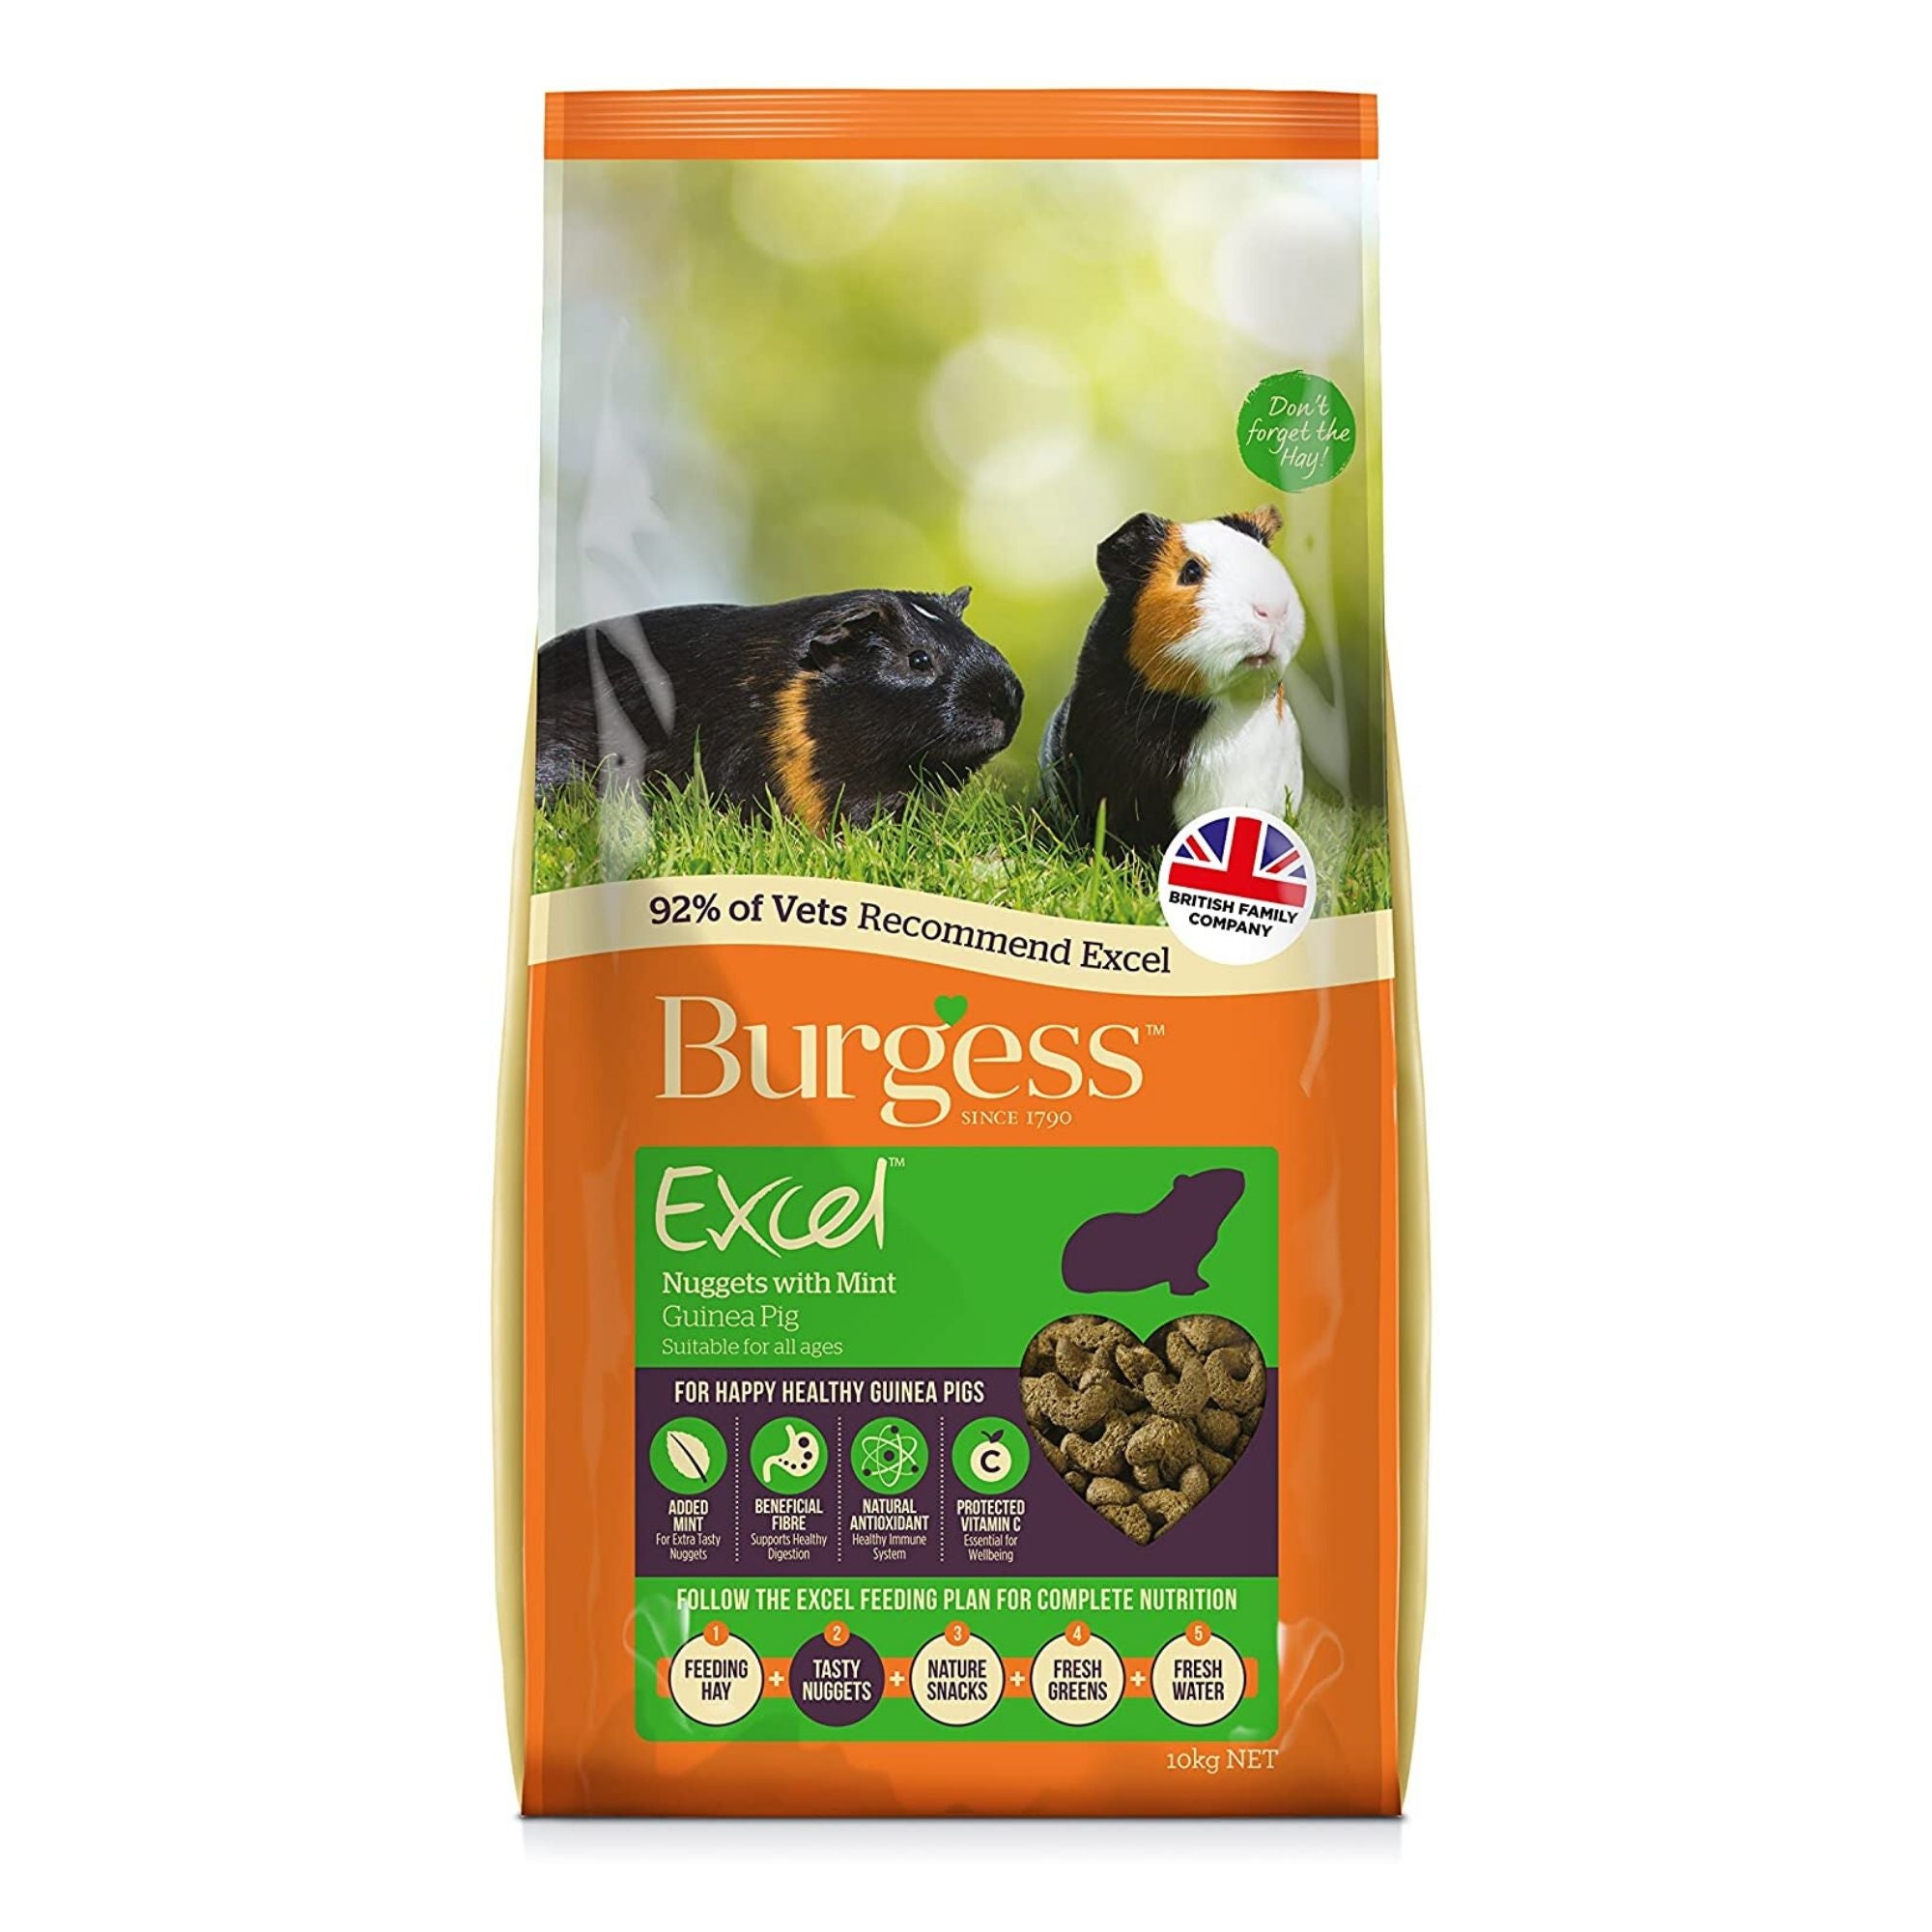 Burgess Excel Guinea Pig Food with Mint Nuggets | Barks & Bunnies